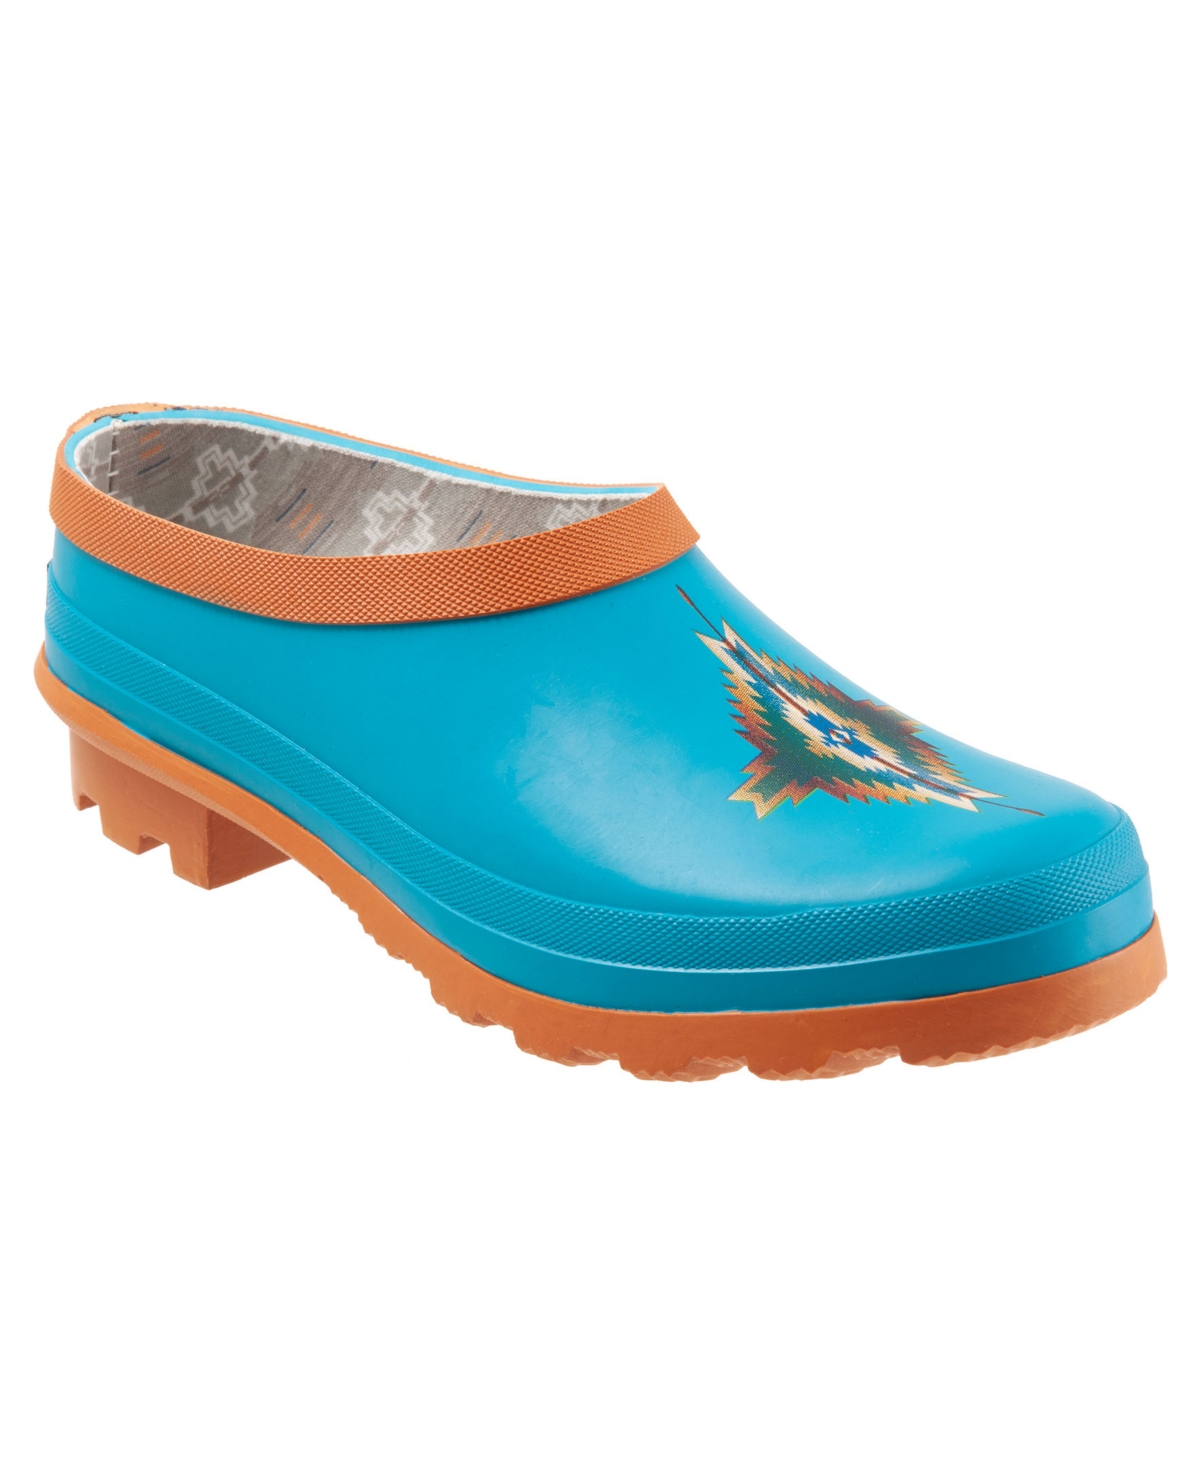 Women's Pagosa Spring Clogs - Turquoise